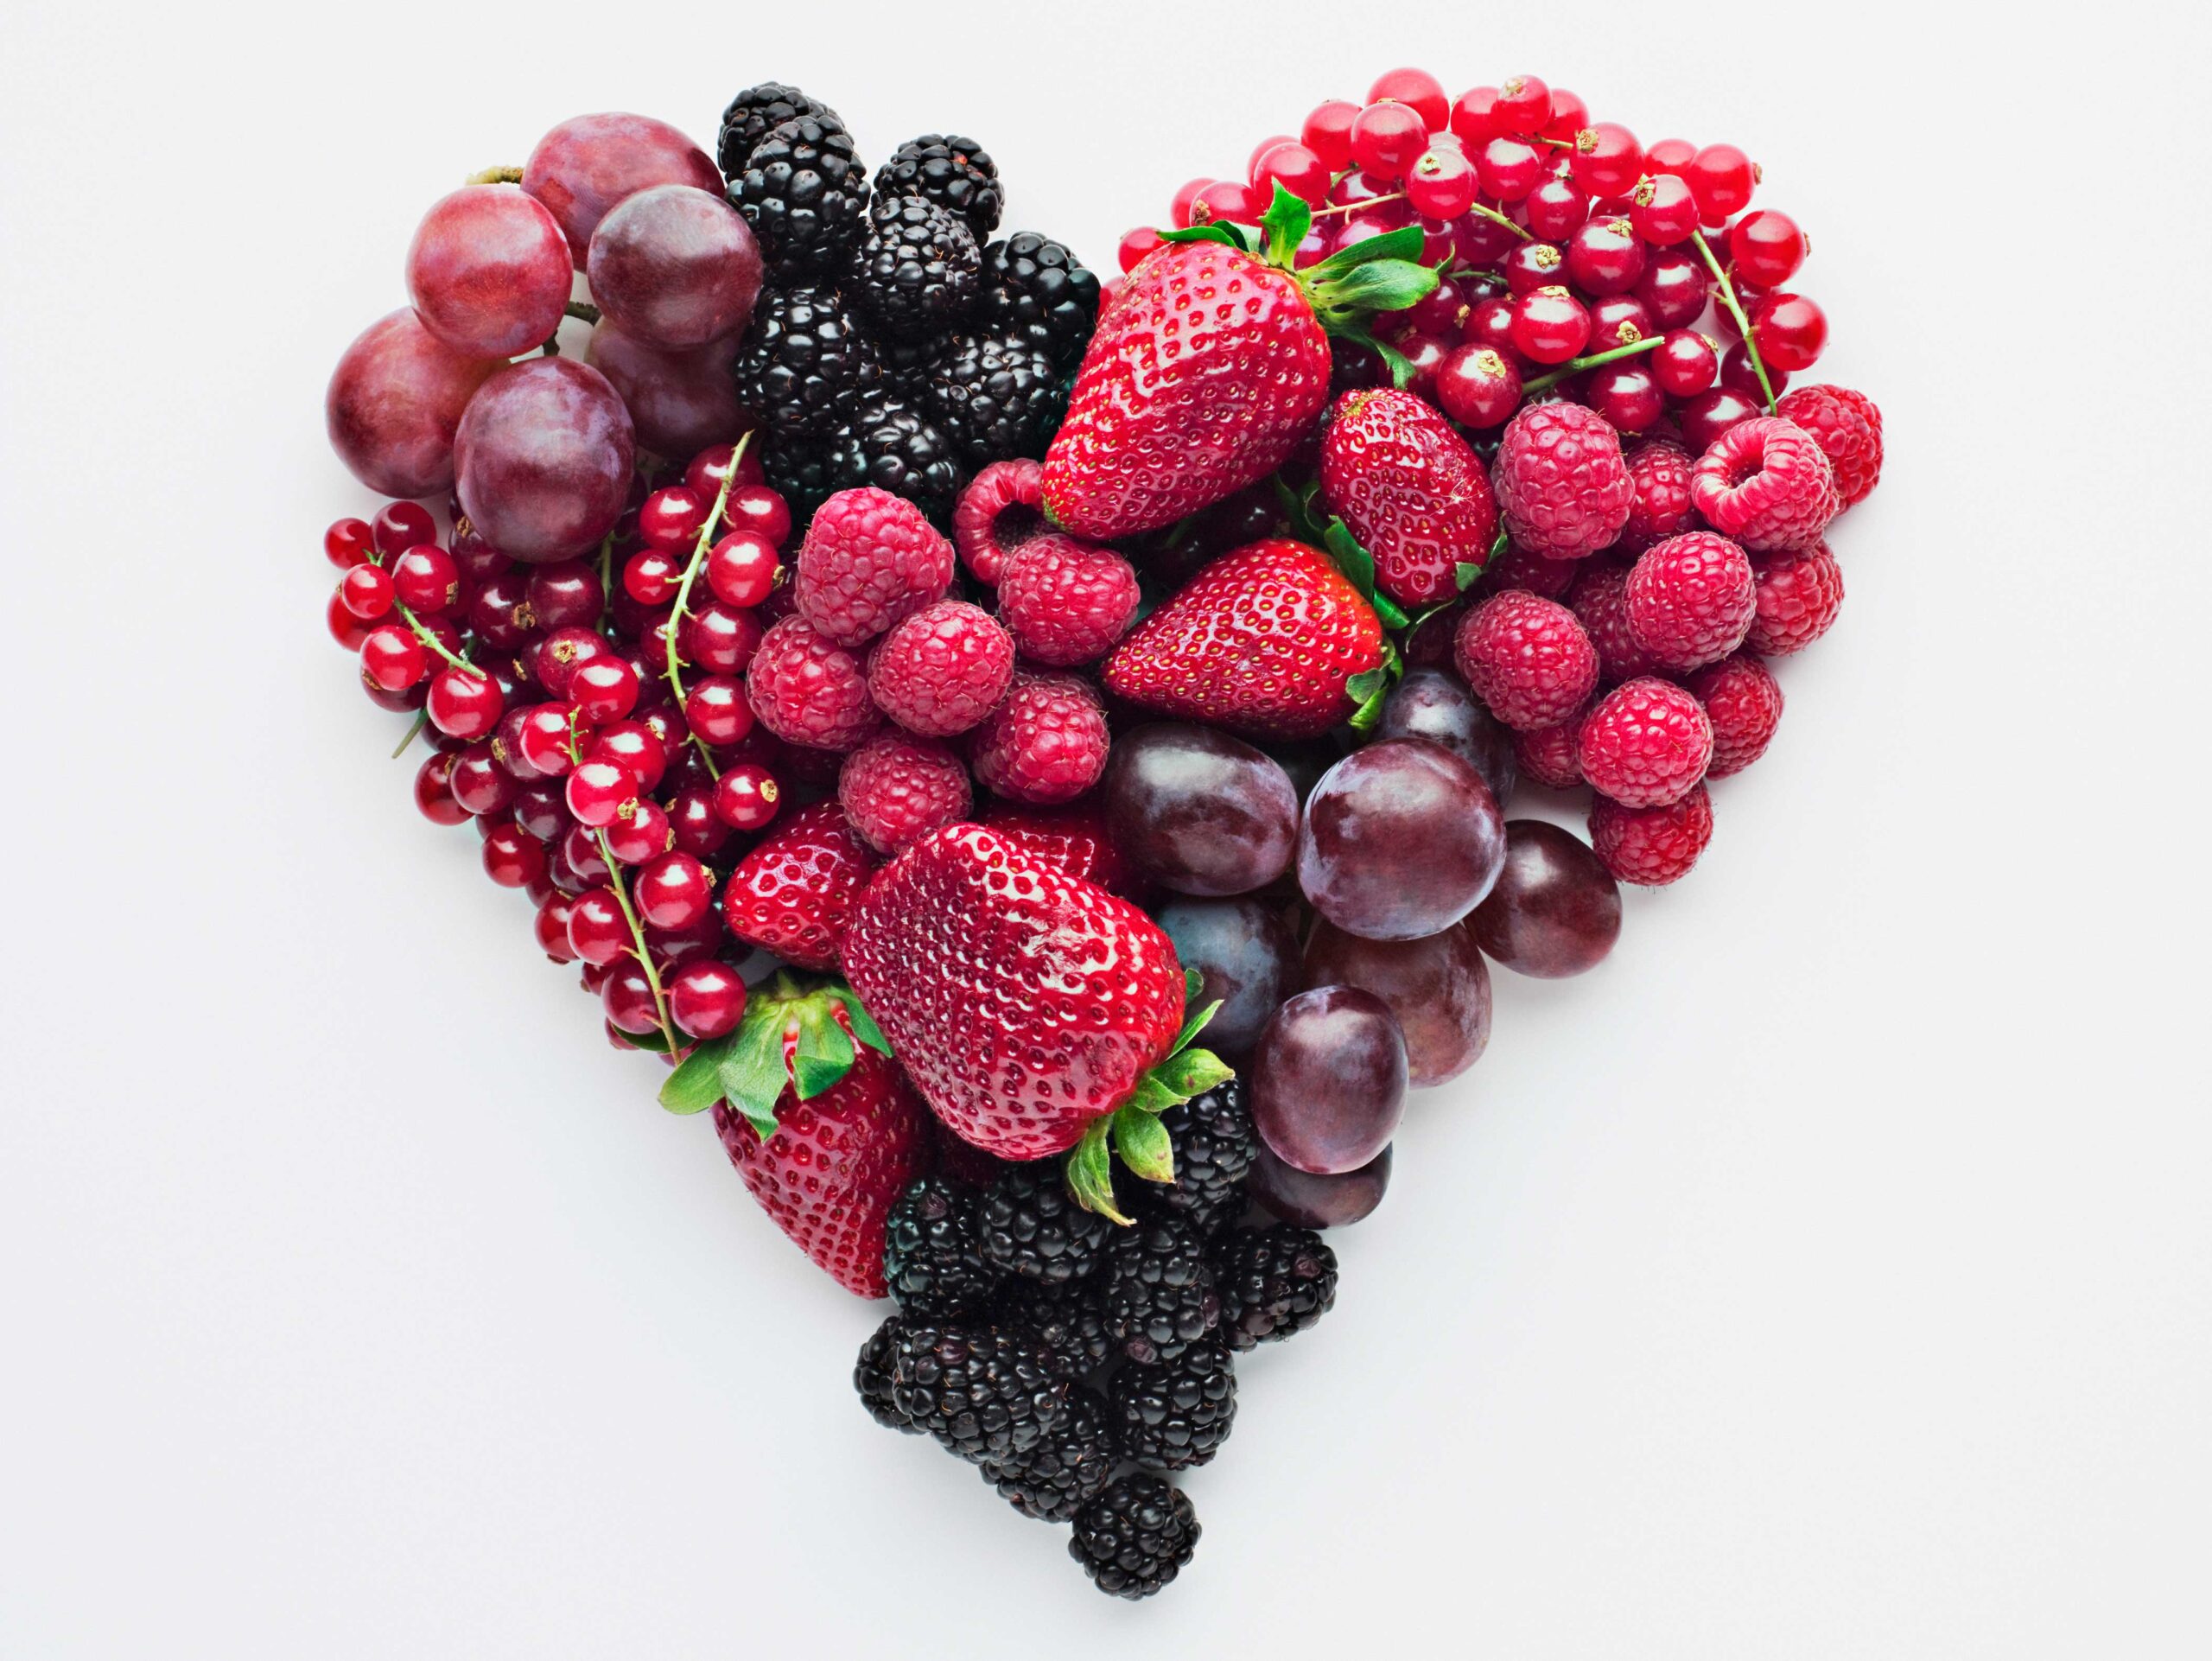 Fruit and berries arranged in a love heart